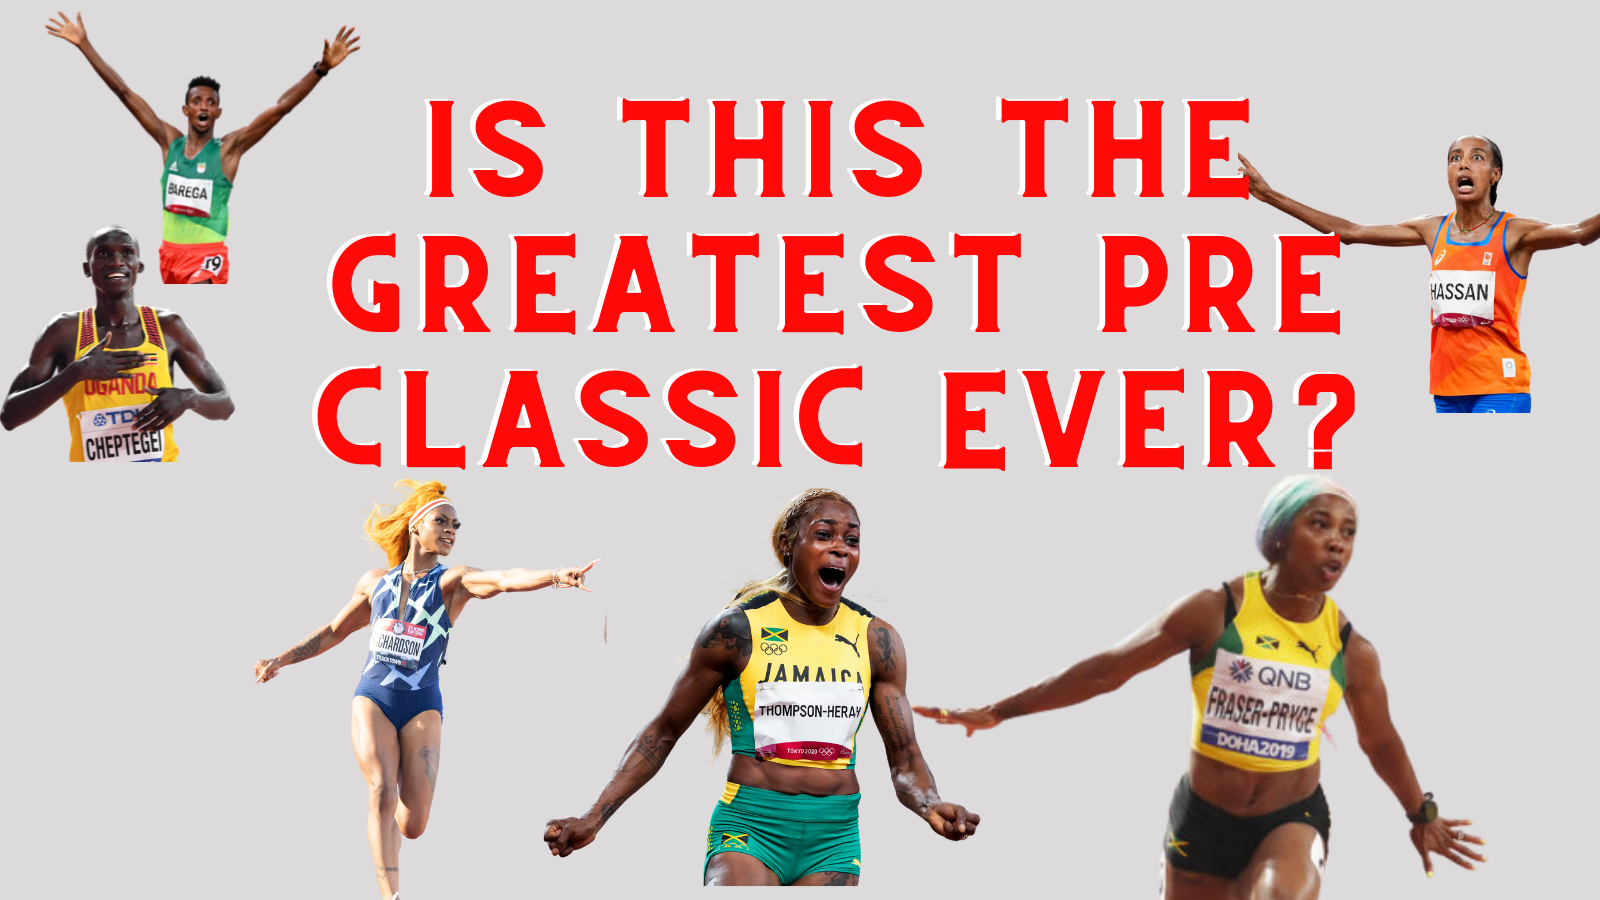 Prefontaine Classic: A preview of what to watch during Saturday's meet